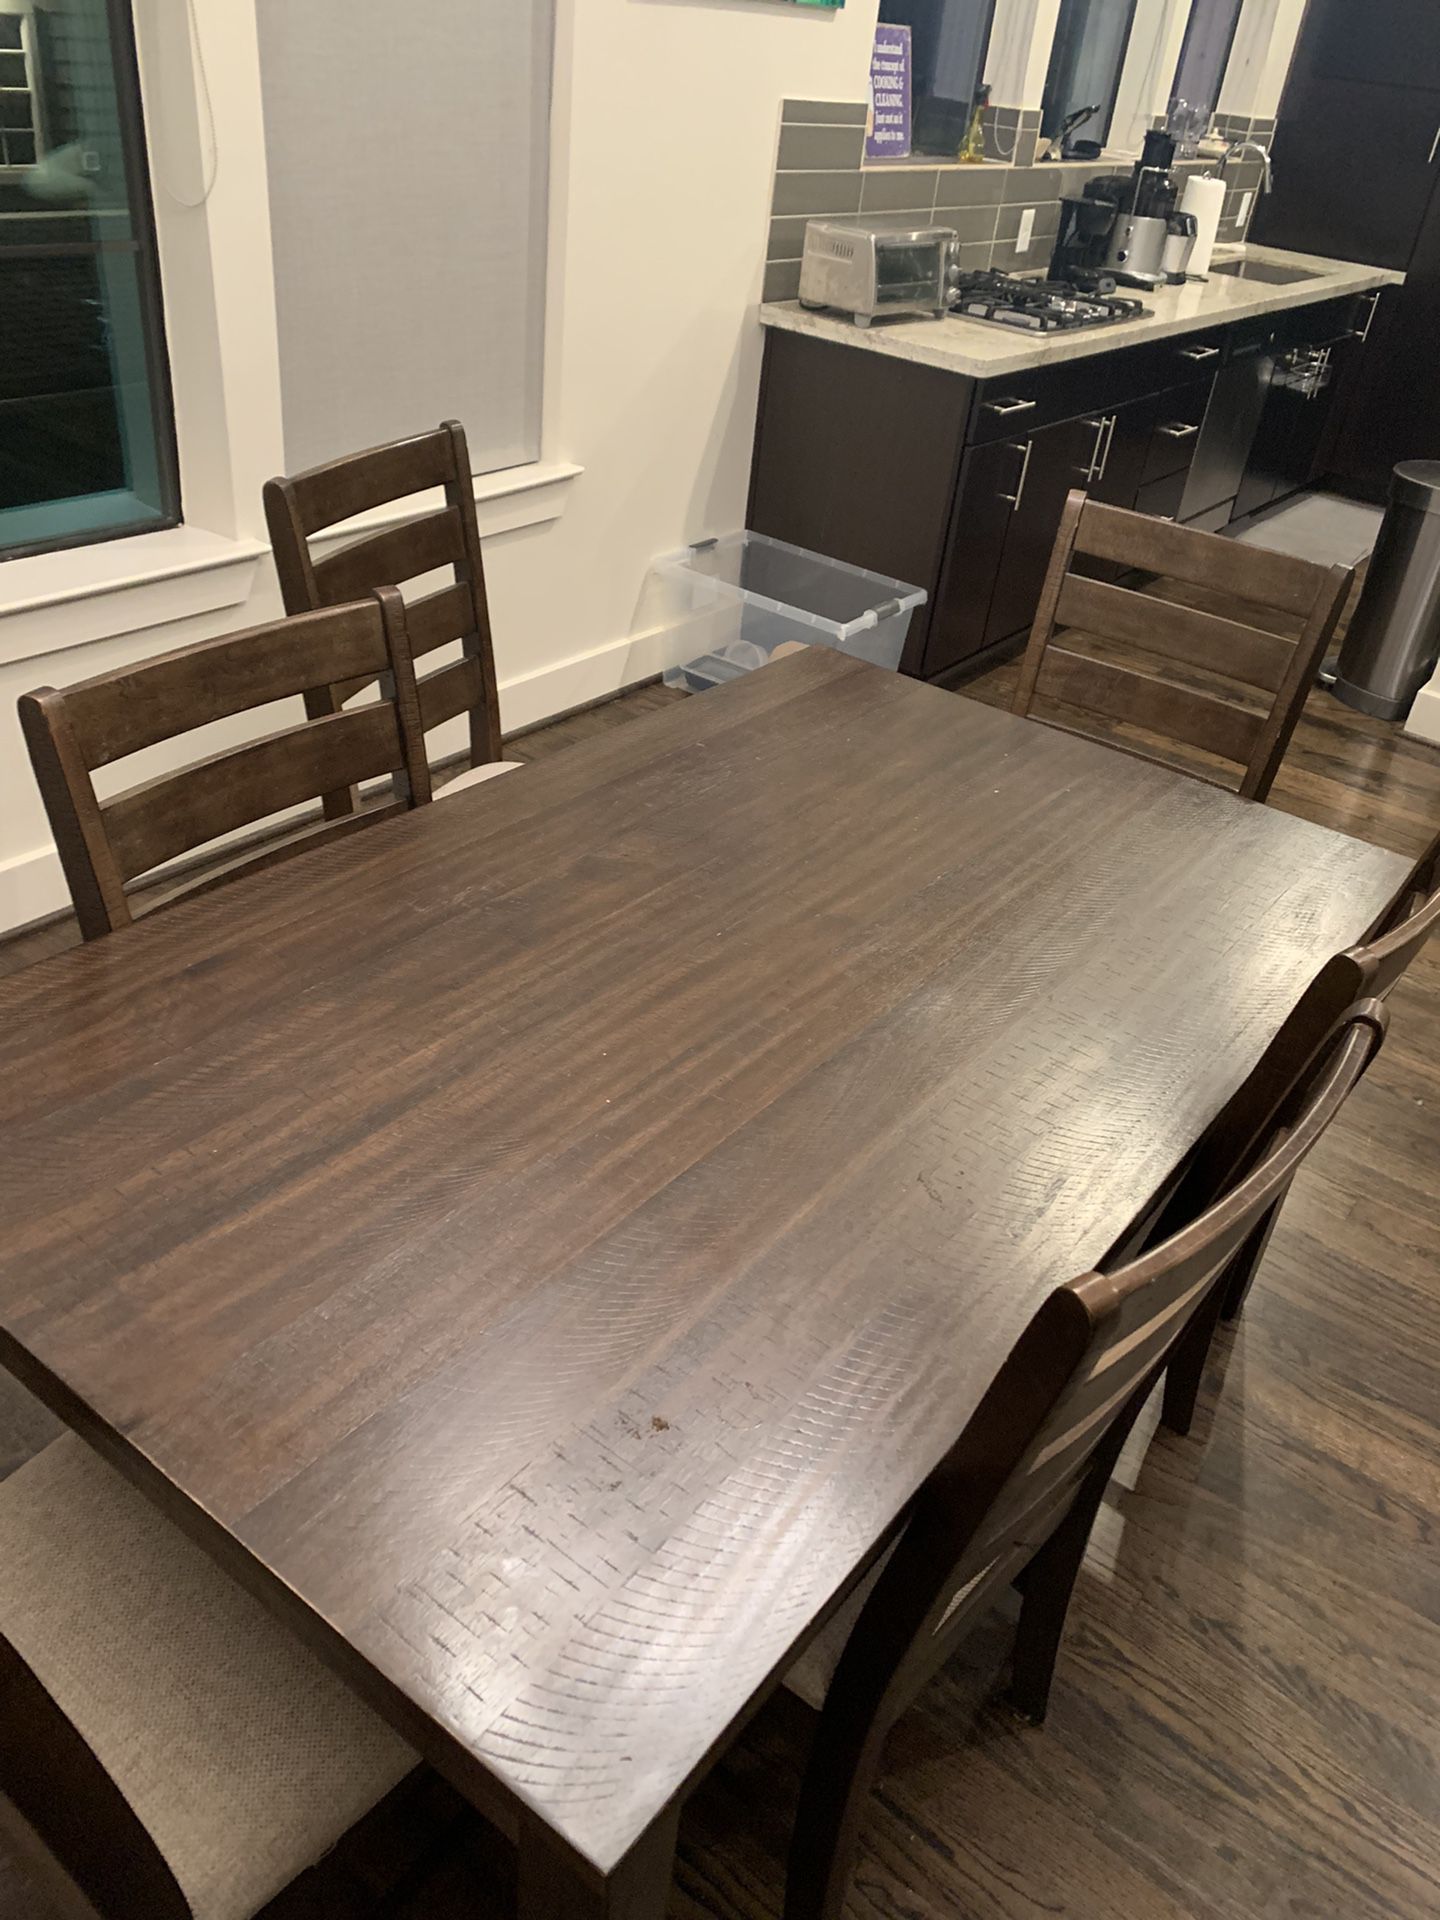 Gently Used Large Dining Room Table 6, Dining Room Table 6 Chairs Used